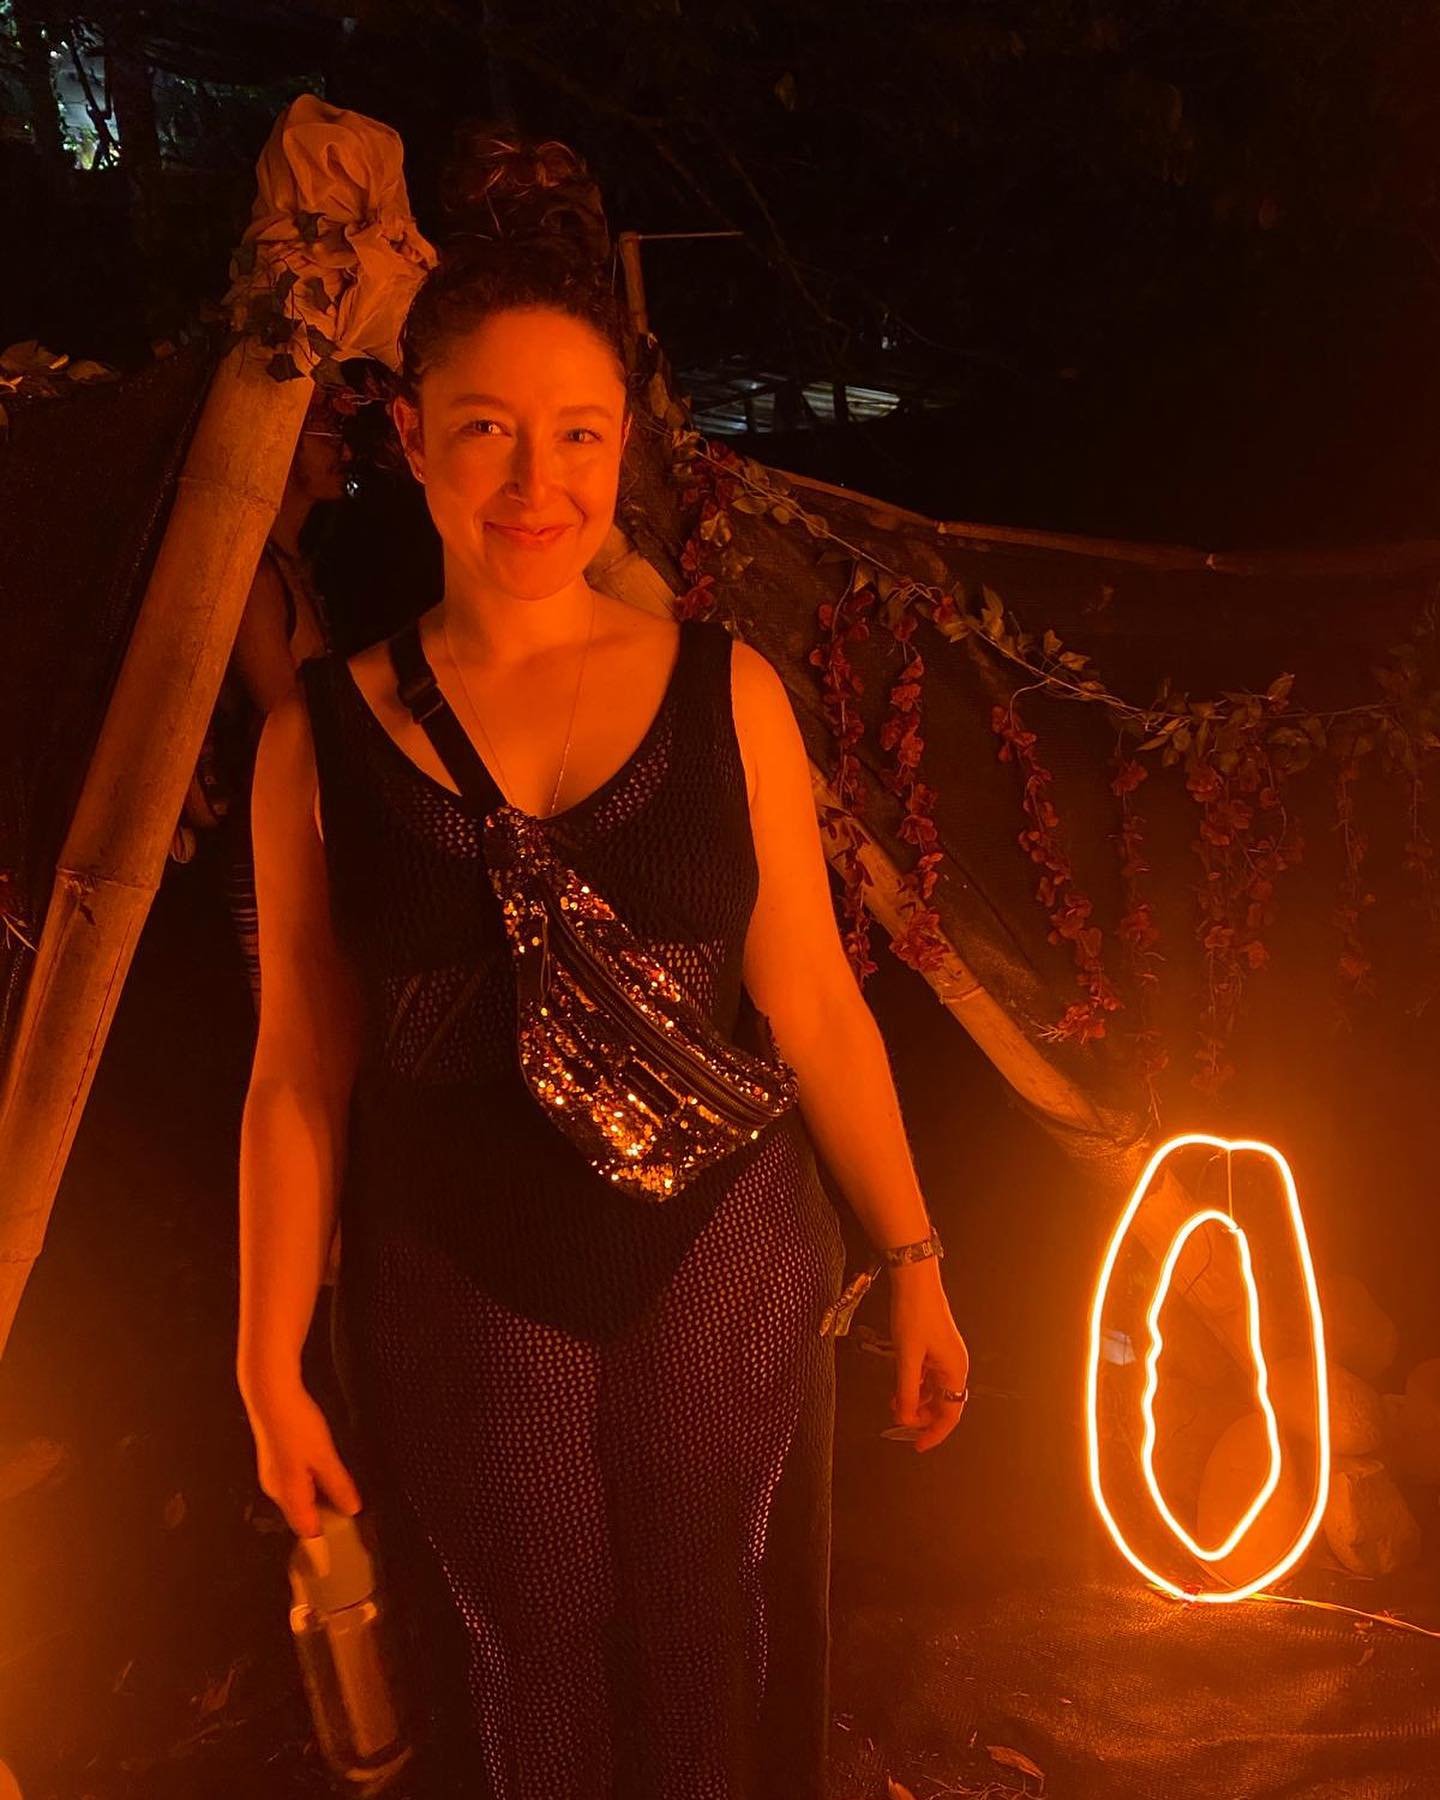 Is she a festy girl? We&rsquo;re not sure yet&hellip;

In my Substack post from last week I talk about my experience going to @envisionfestival last month. As soon as I got to Costa Rica (I know, I can&rsquo;t stay away), my body just wanted to be in